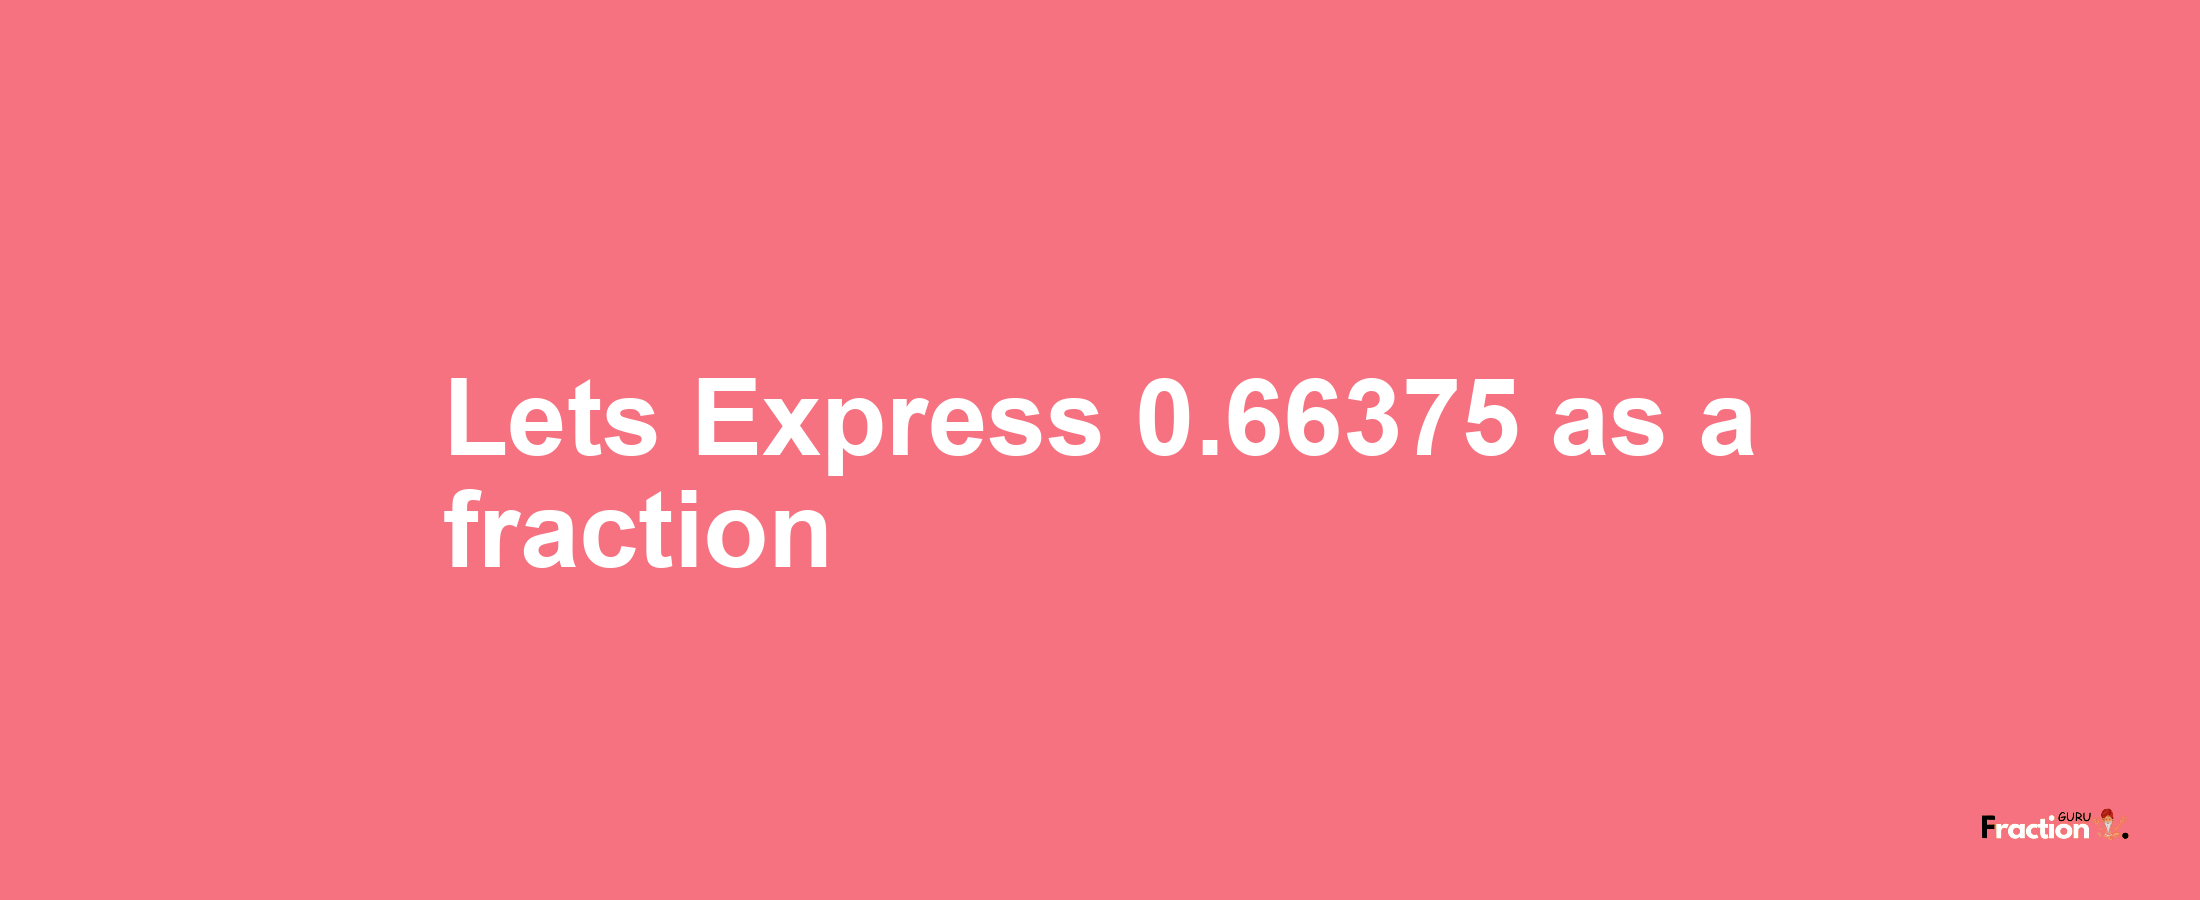 Lets Express 0.66375 as afraction